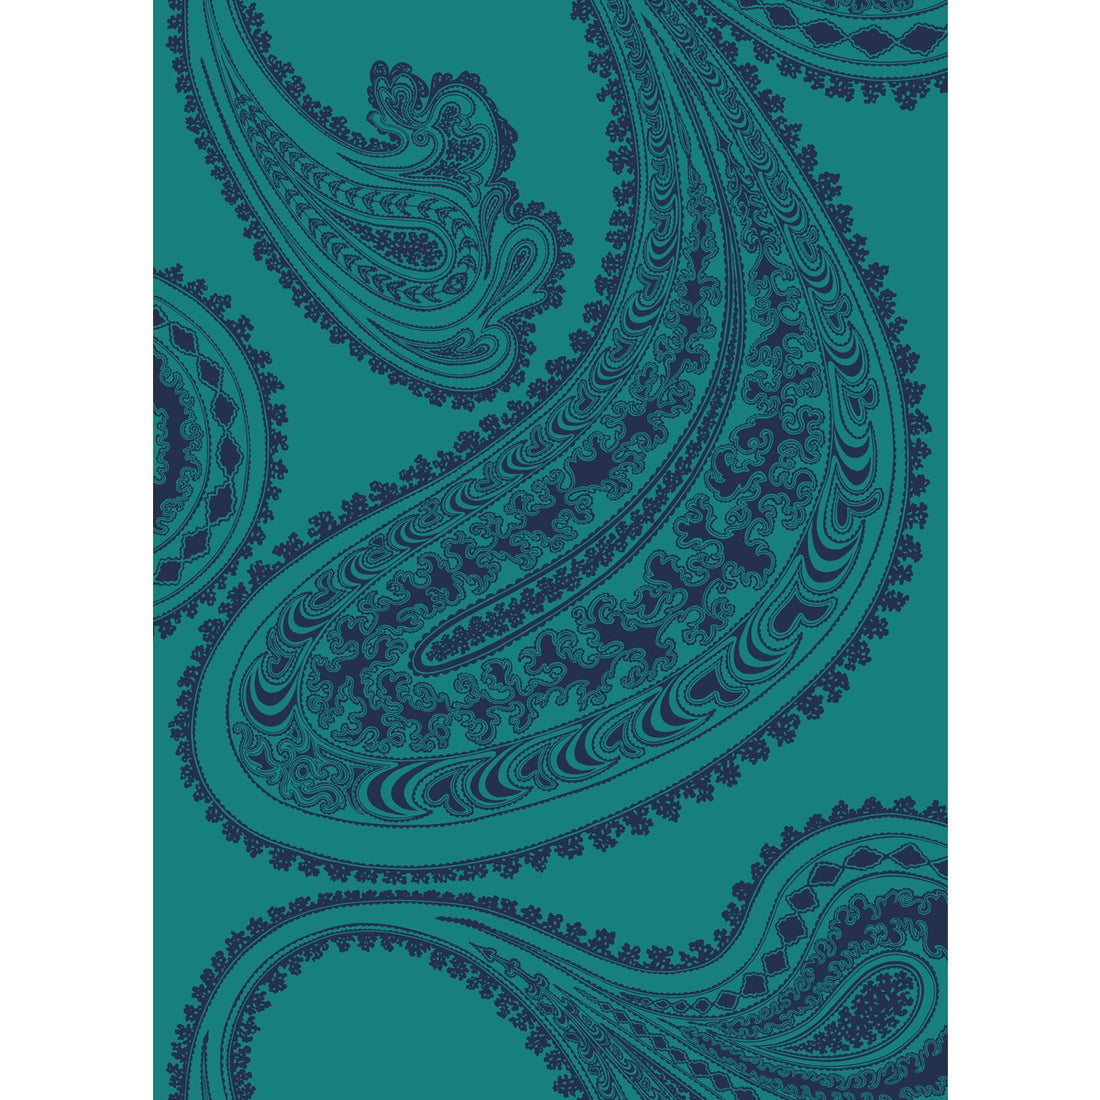 Rajapur fabric in ink on petrol color - pattern F111/10036.CS.0 - by Cole &amp; Son in the Cole &amp; Son Contemporary Fabrics collection